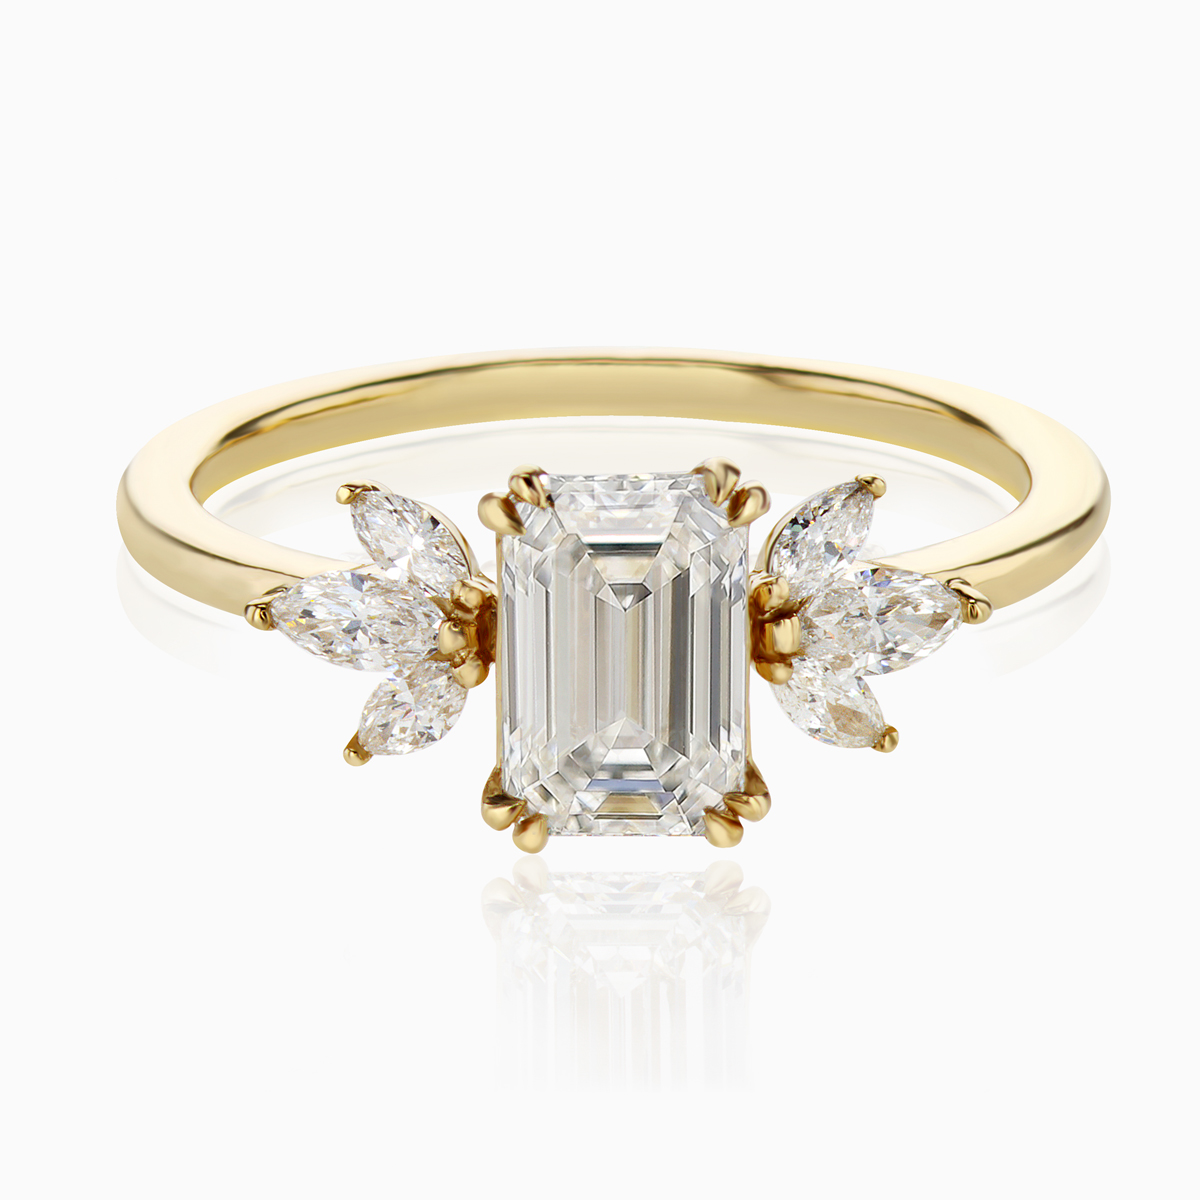 Floral-Inspired Engagement Ring with 1-Carat Lab-Grown Emerald Cut Diamond